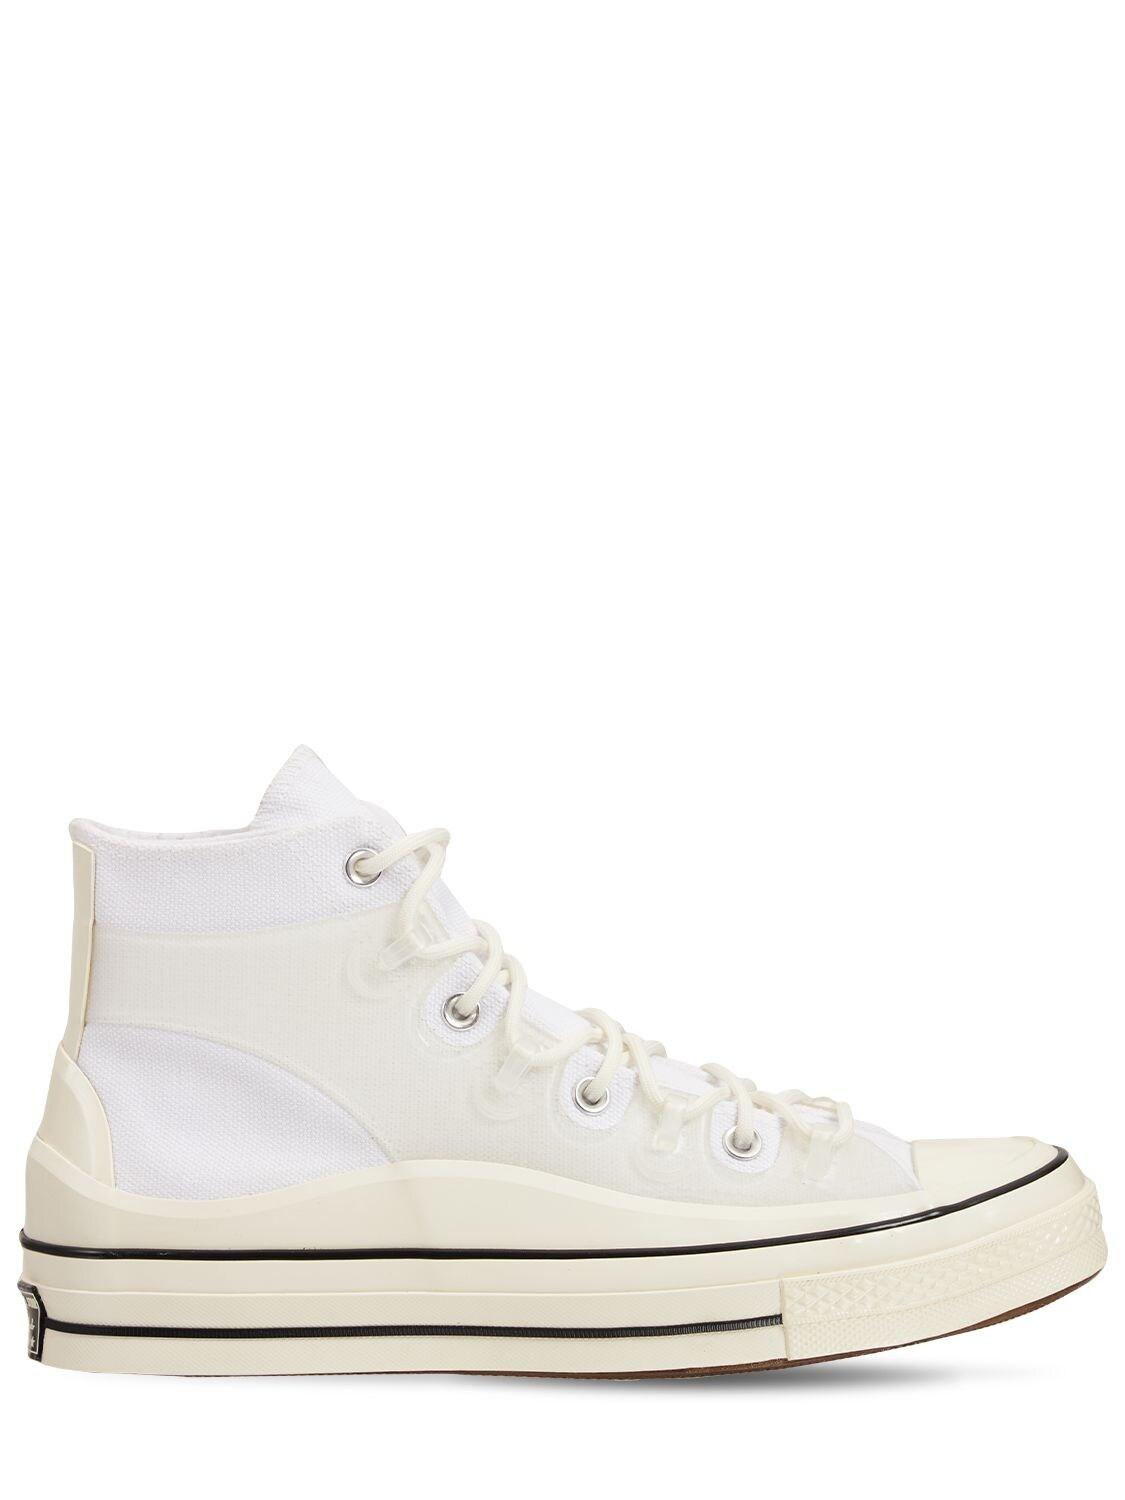 Converse Chuck 70 Translucent Caged Sneakers in White | Lyst